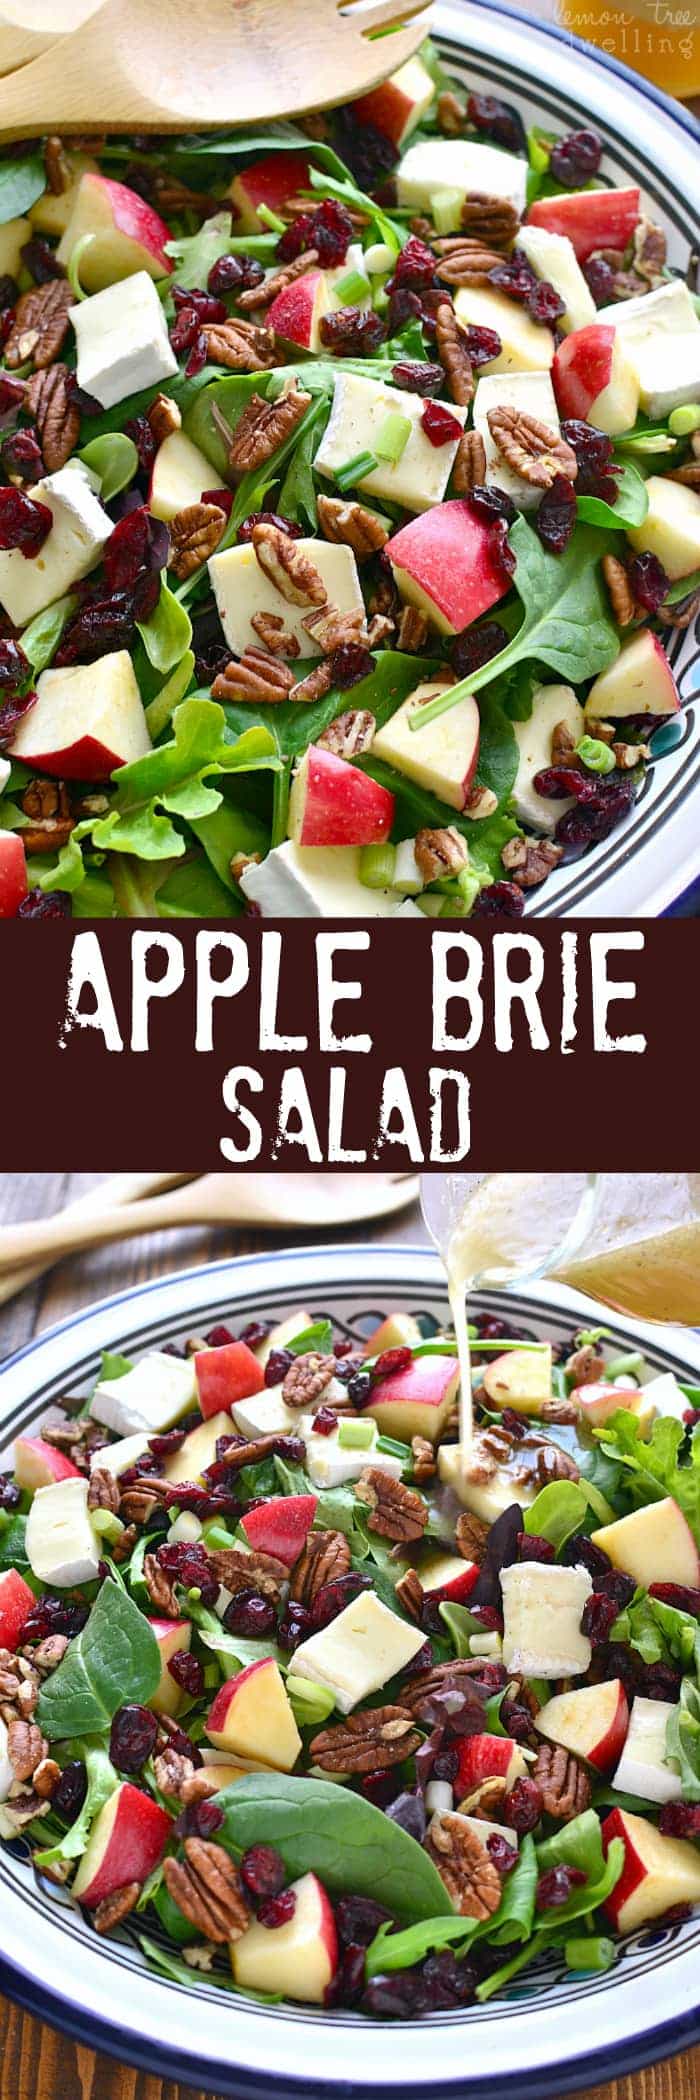 Collage image of Apple Brie Salad